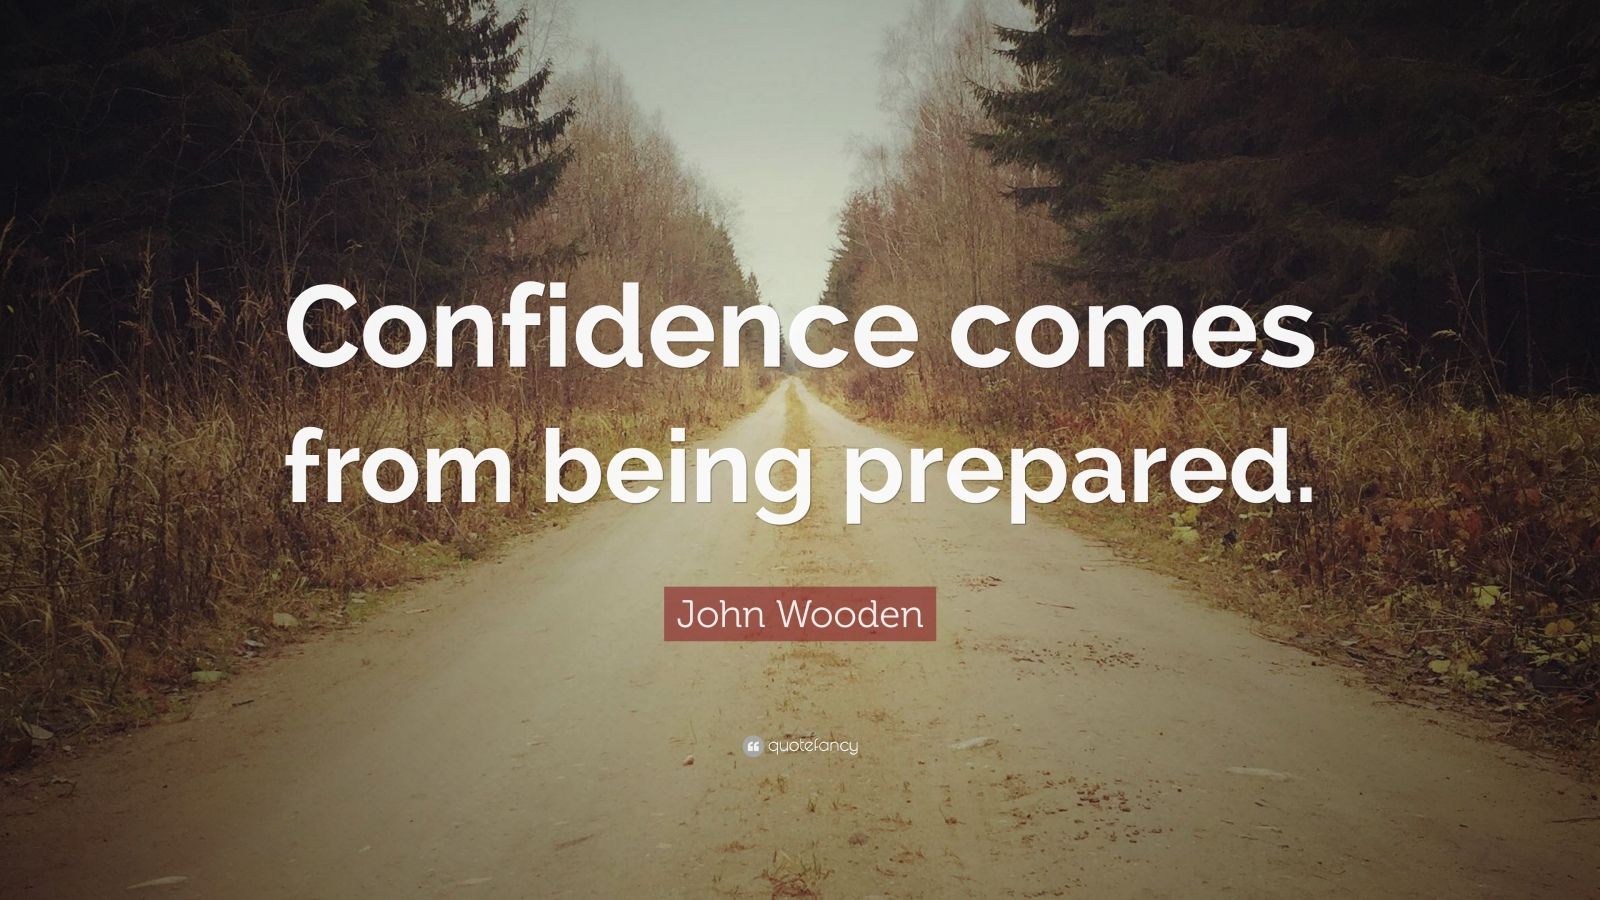 John Wooden Quote: “Confidence comes from being prepared.” (12